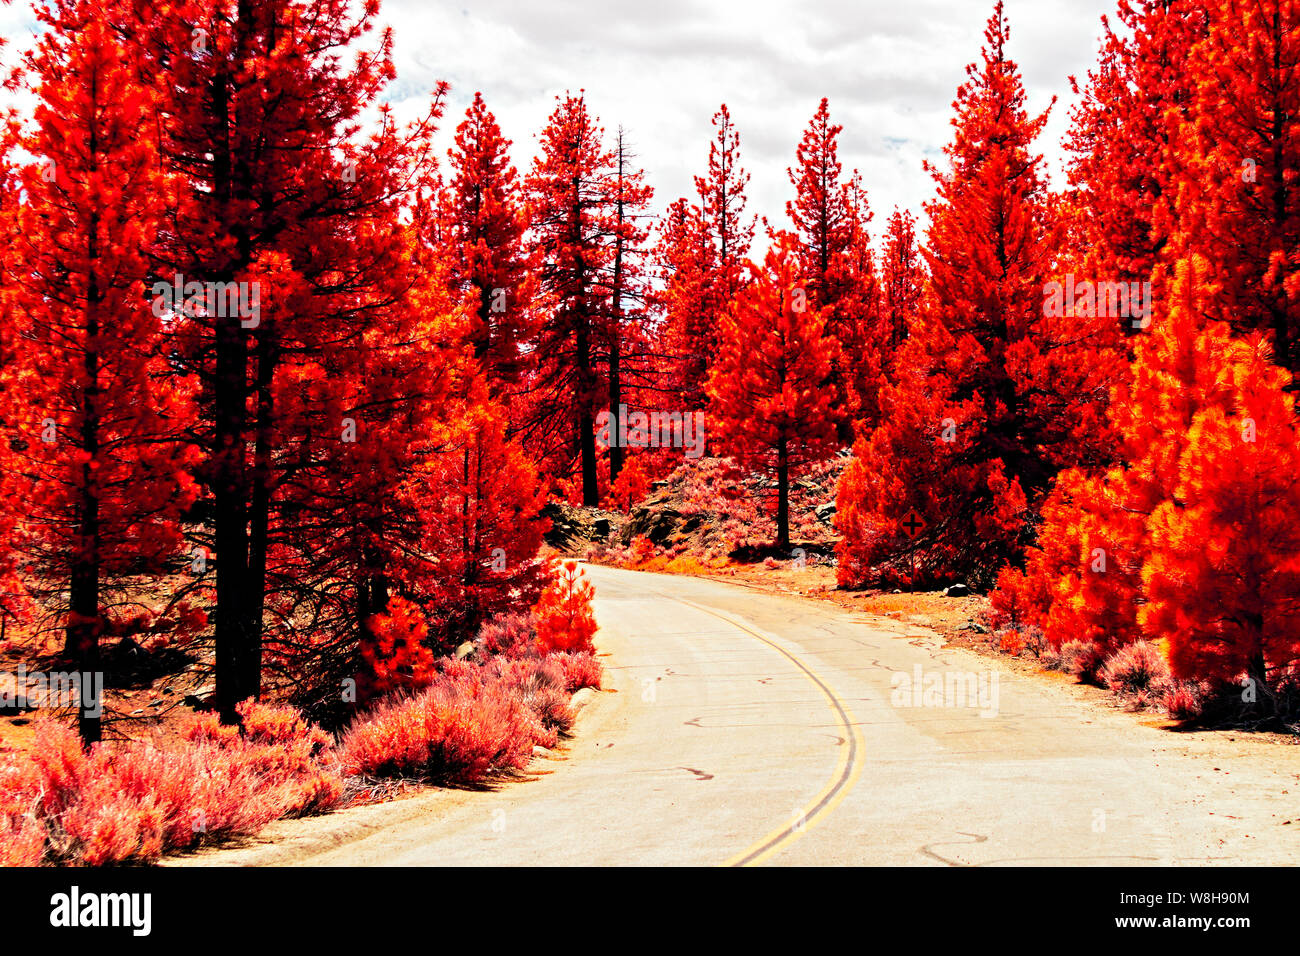 Country road curving through autumn trees under cloudy skies. Stock Photo